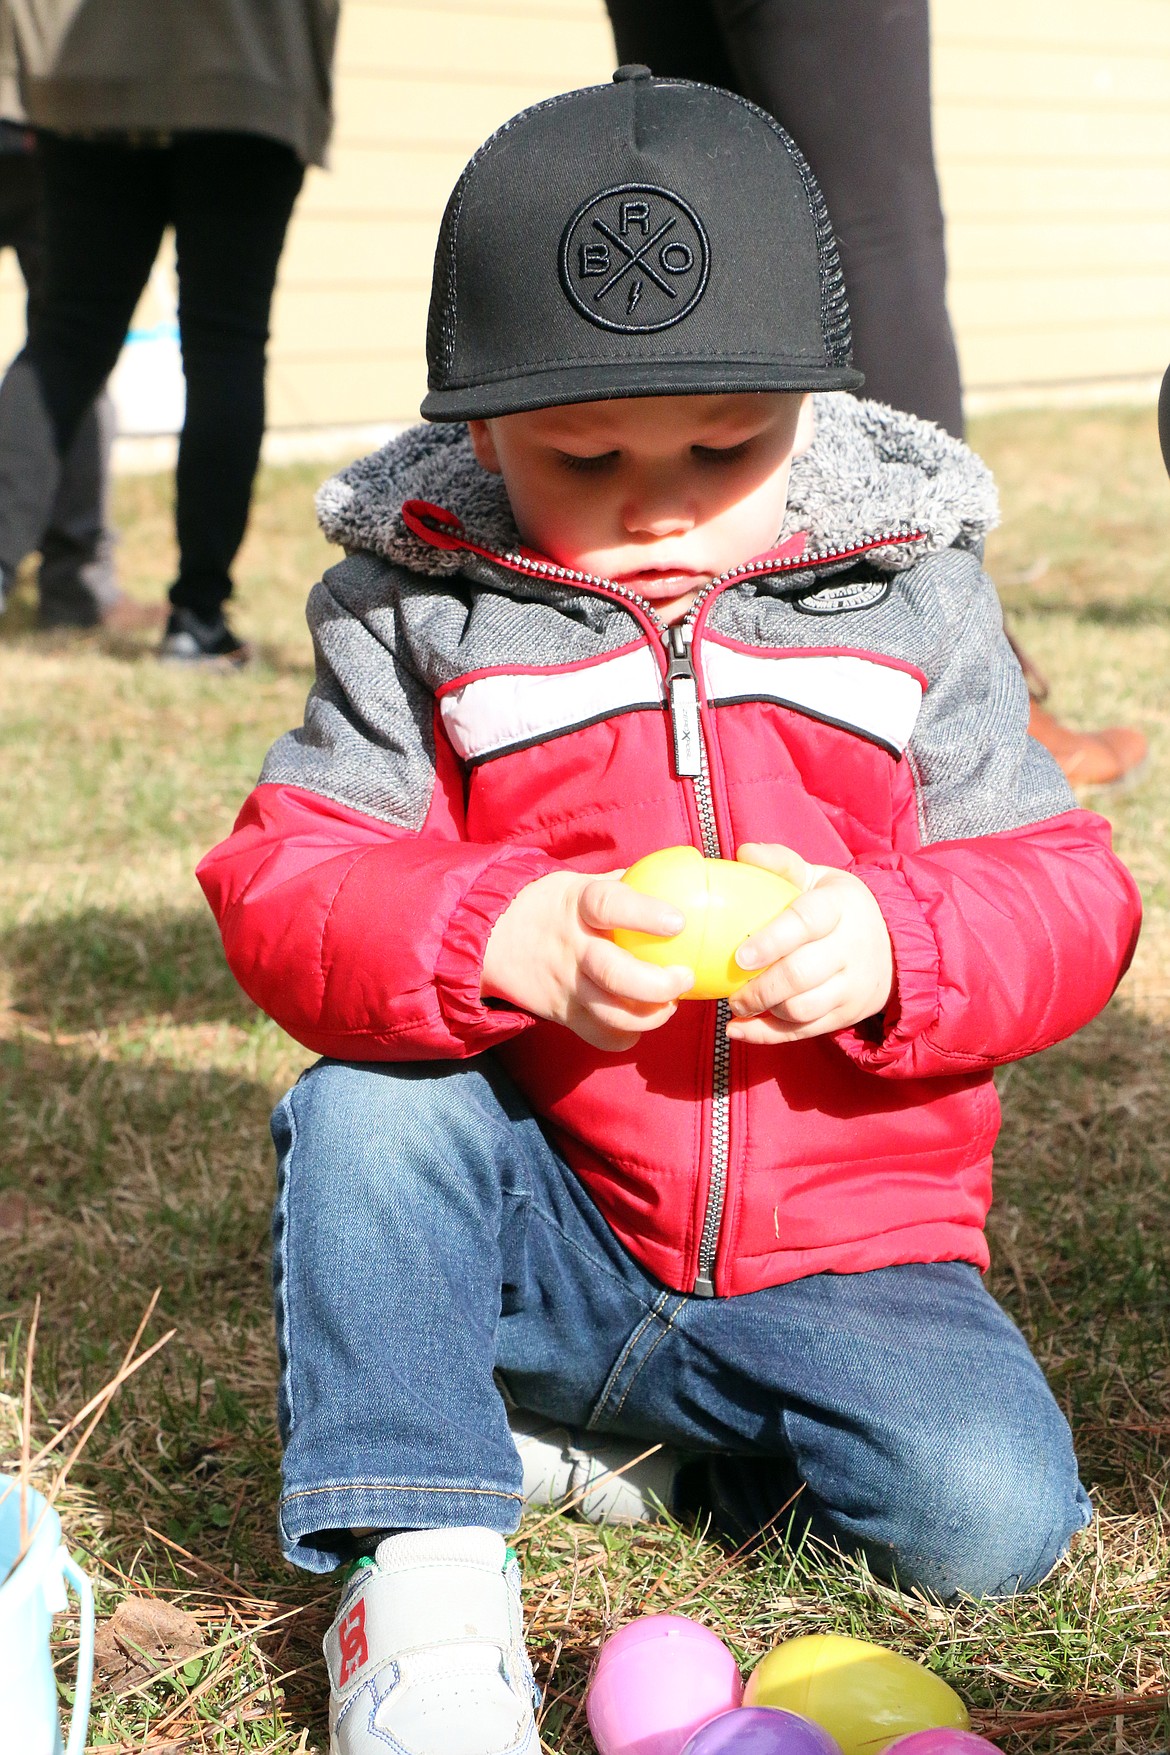 Connor Narwold peeks inside to see what is inside a plastic Easter egg during the Sandpoint Lions annual Easter egg hunt at Lakeview Park on Saturday.